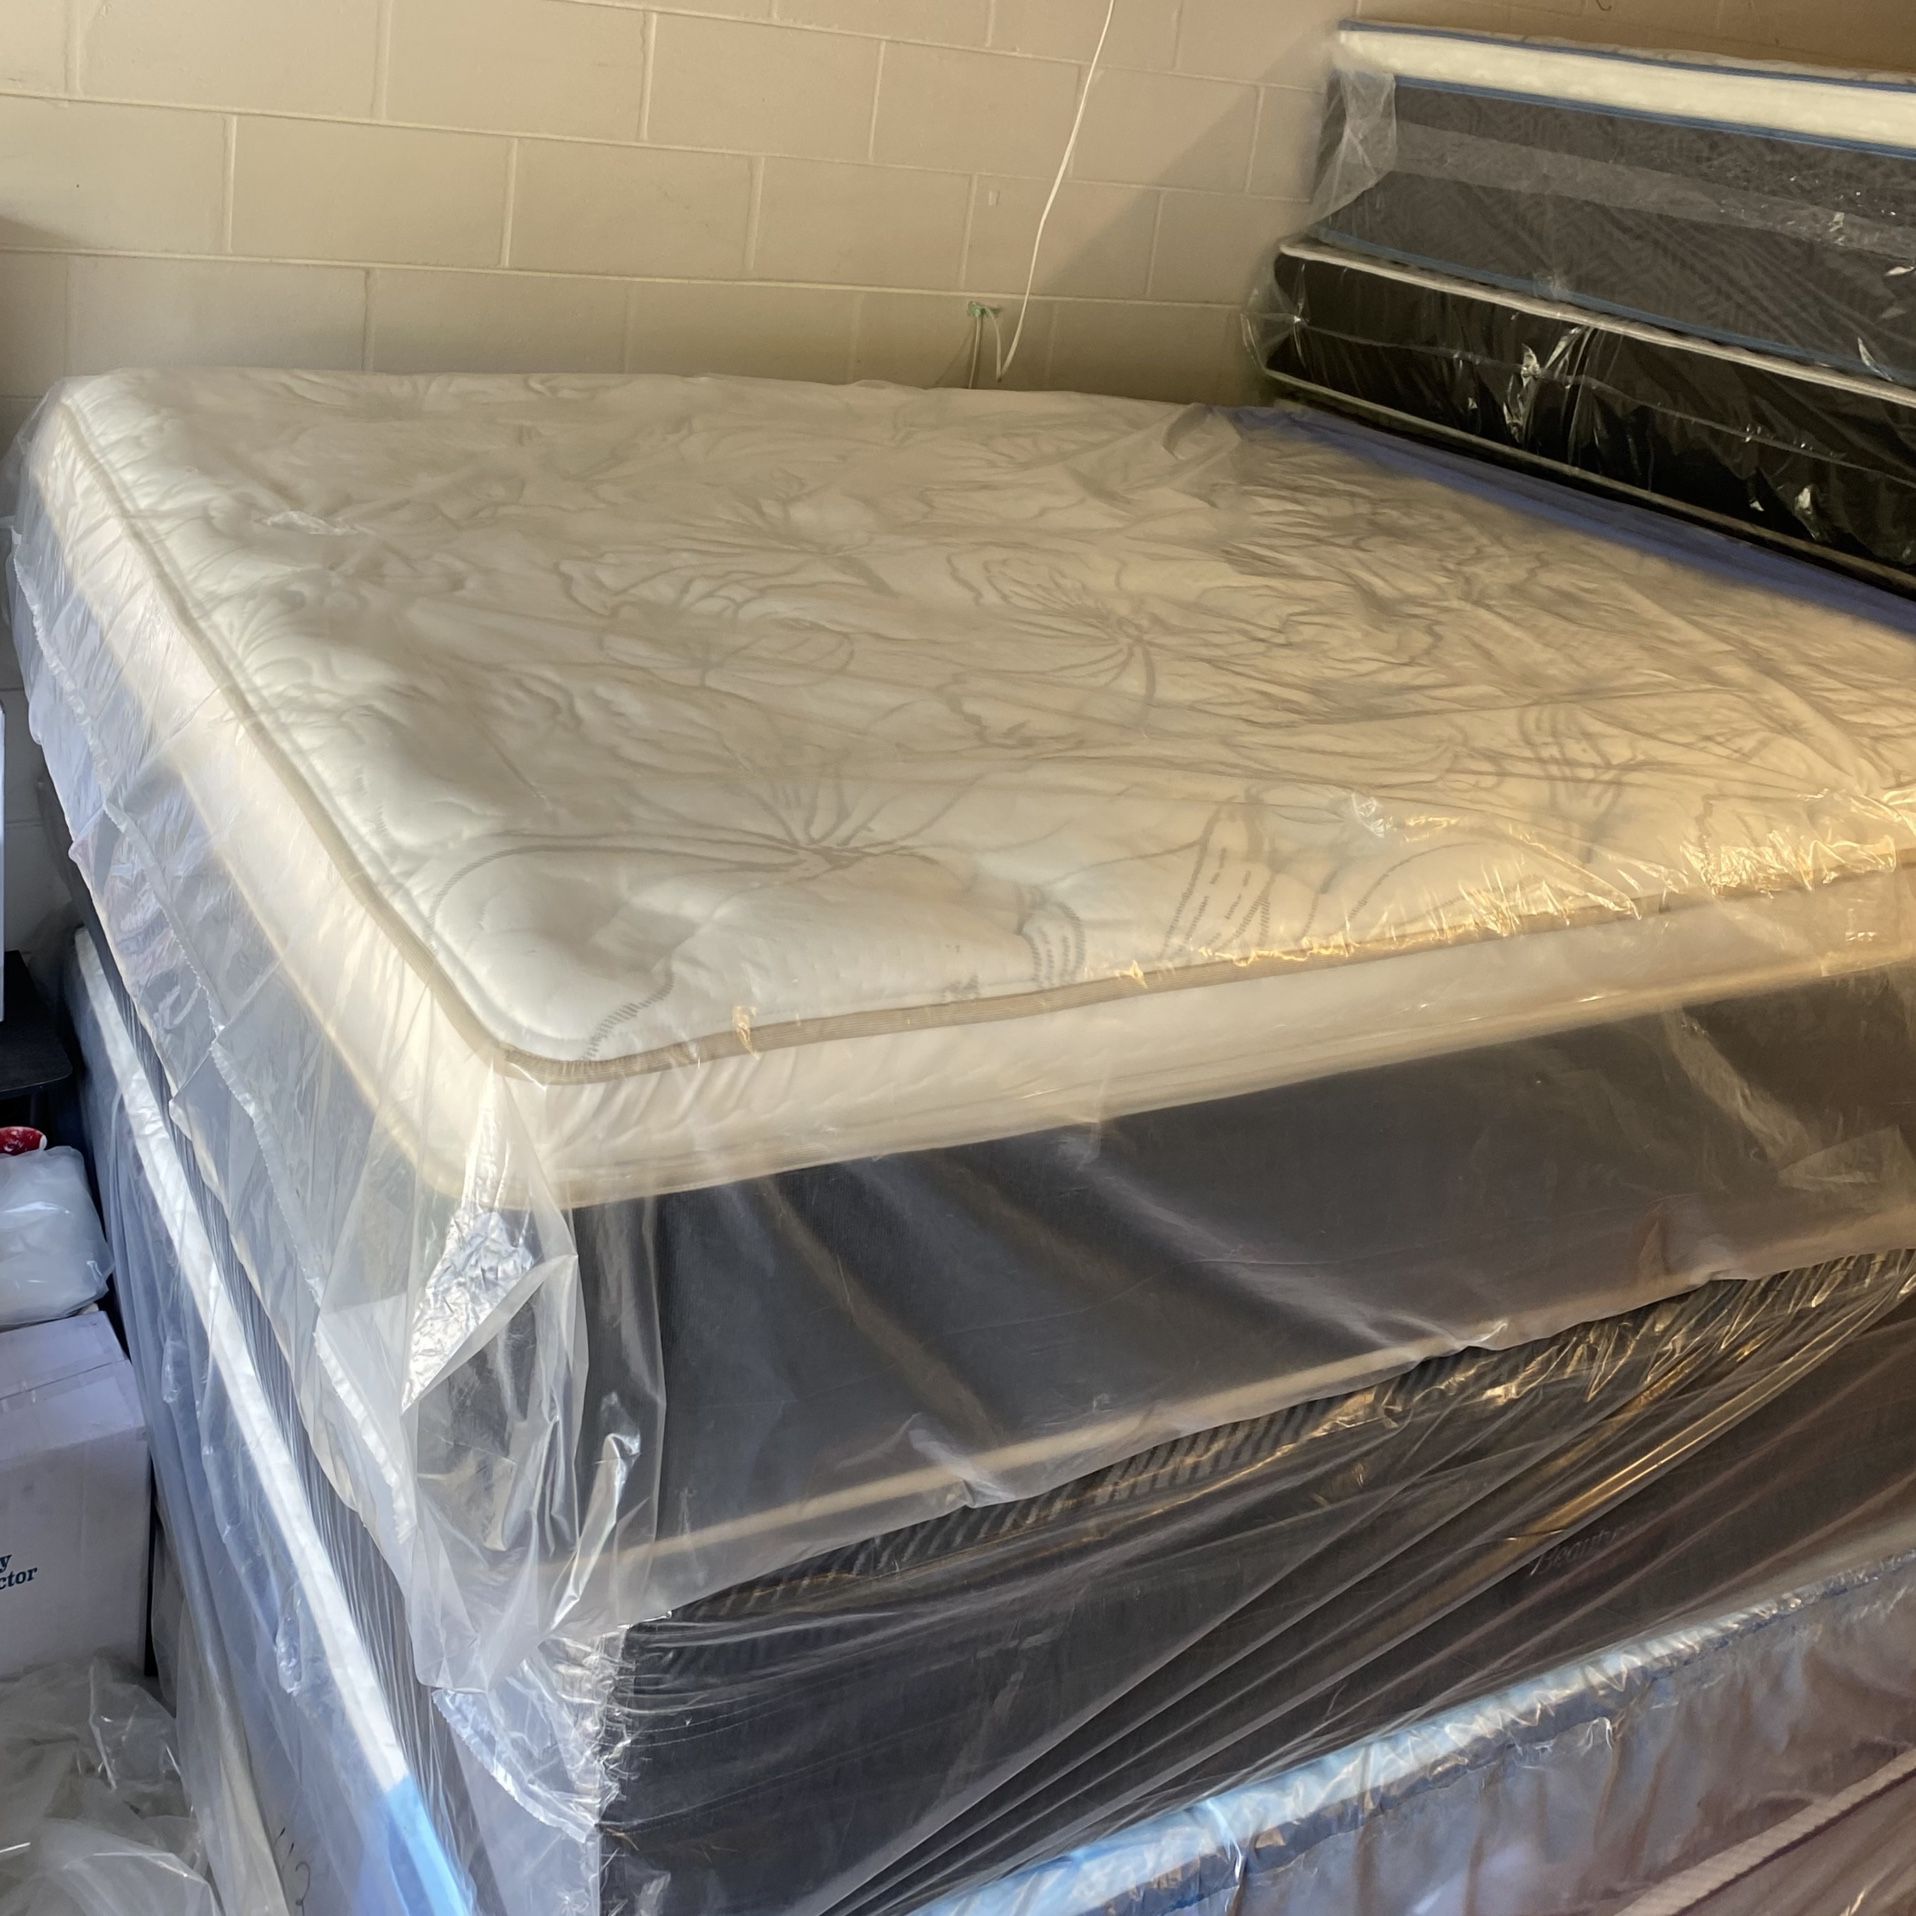 California King Size Mattress 14 Inch Thick With Pillow Top Of Gran Comfort And Box Springs New From Factory Available All Sizes Same Day Delivery